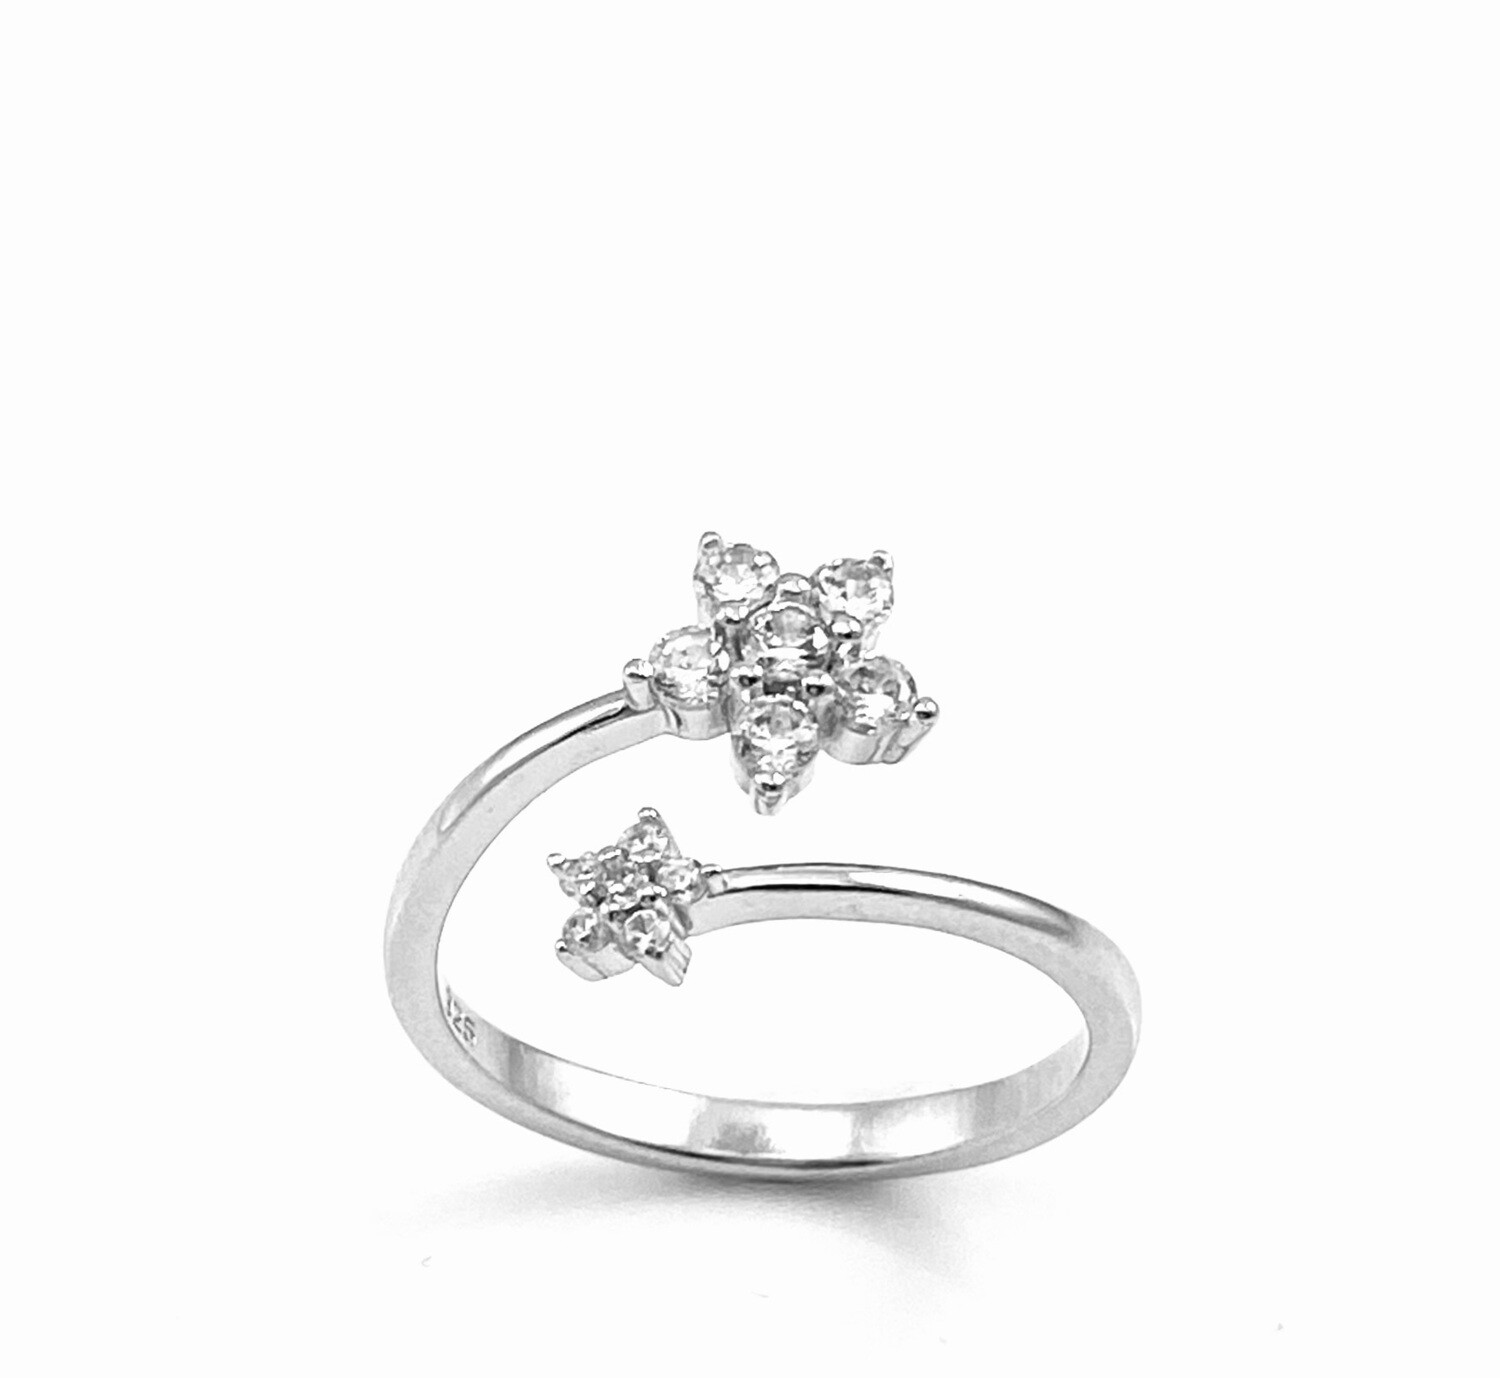 Ring "Double Star"